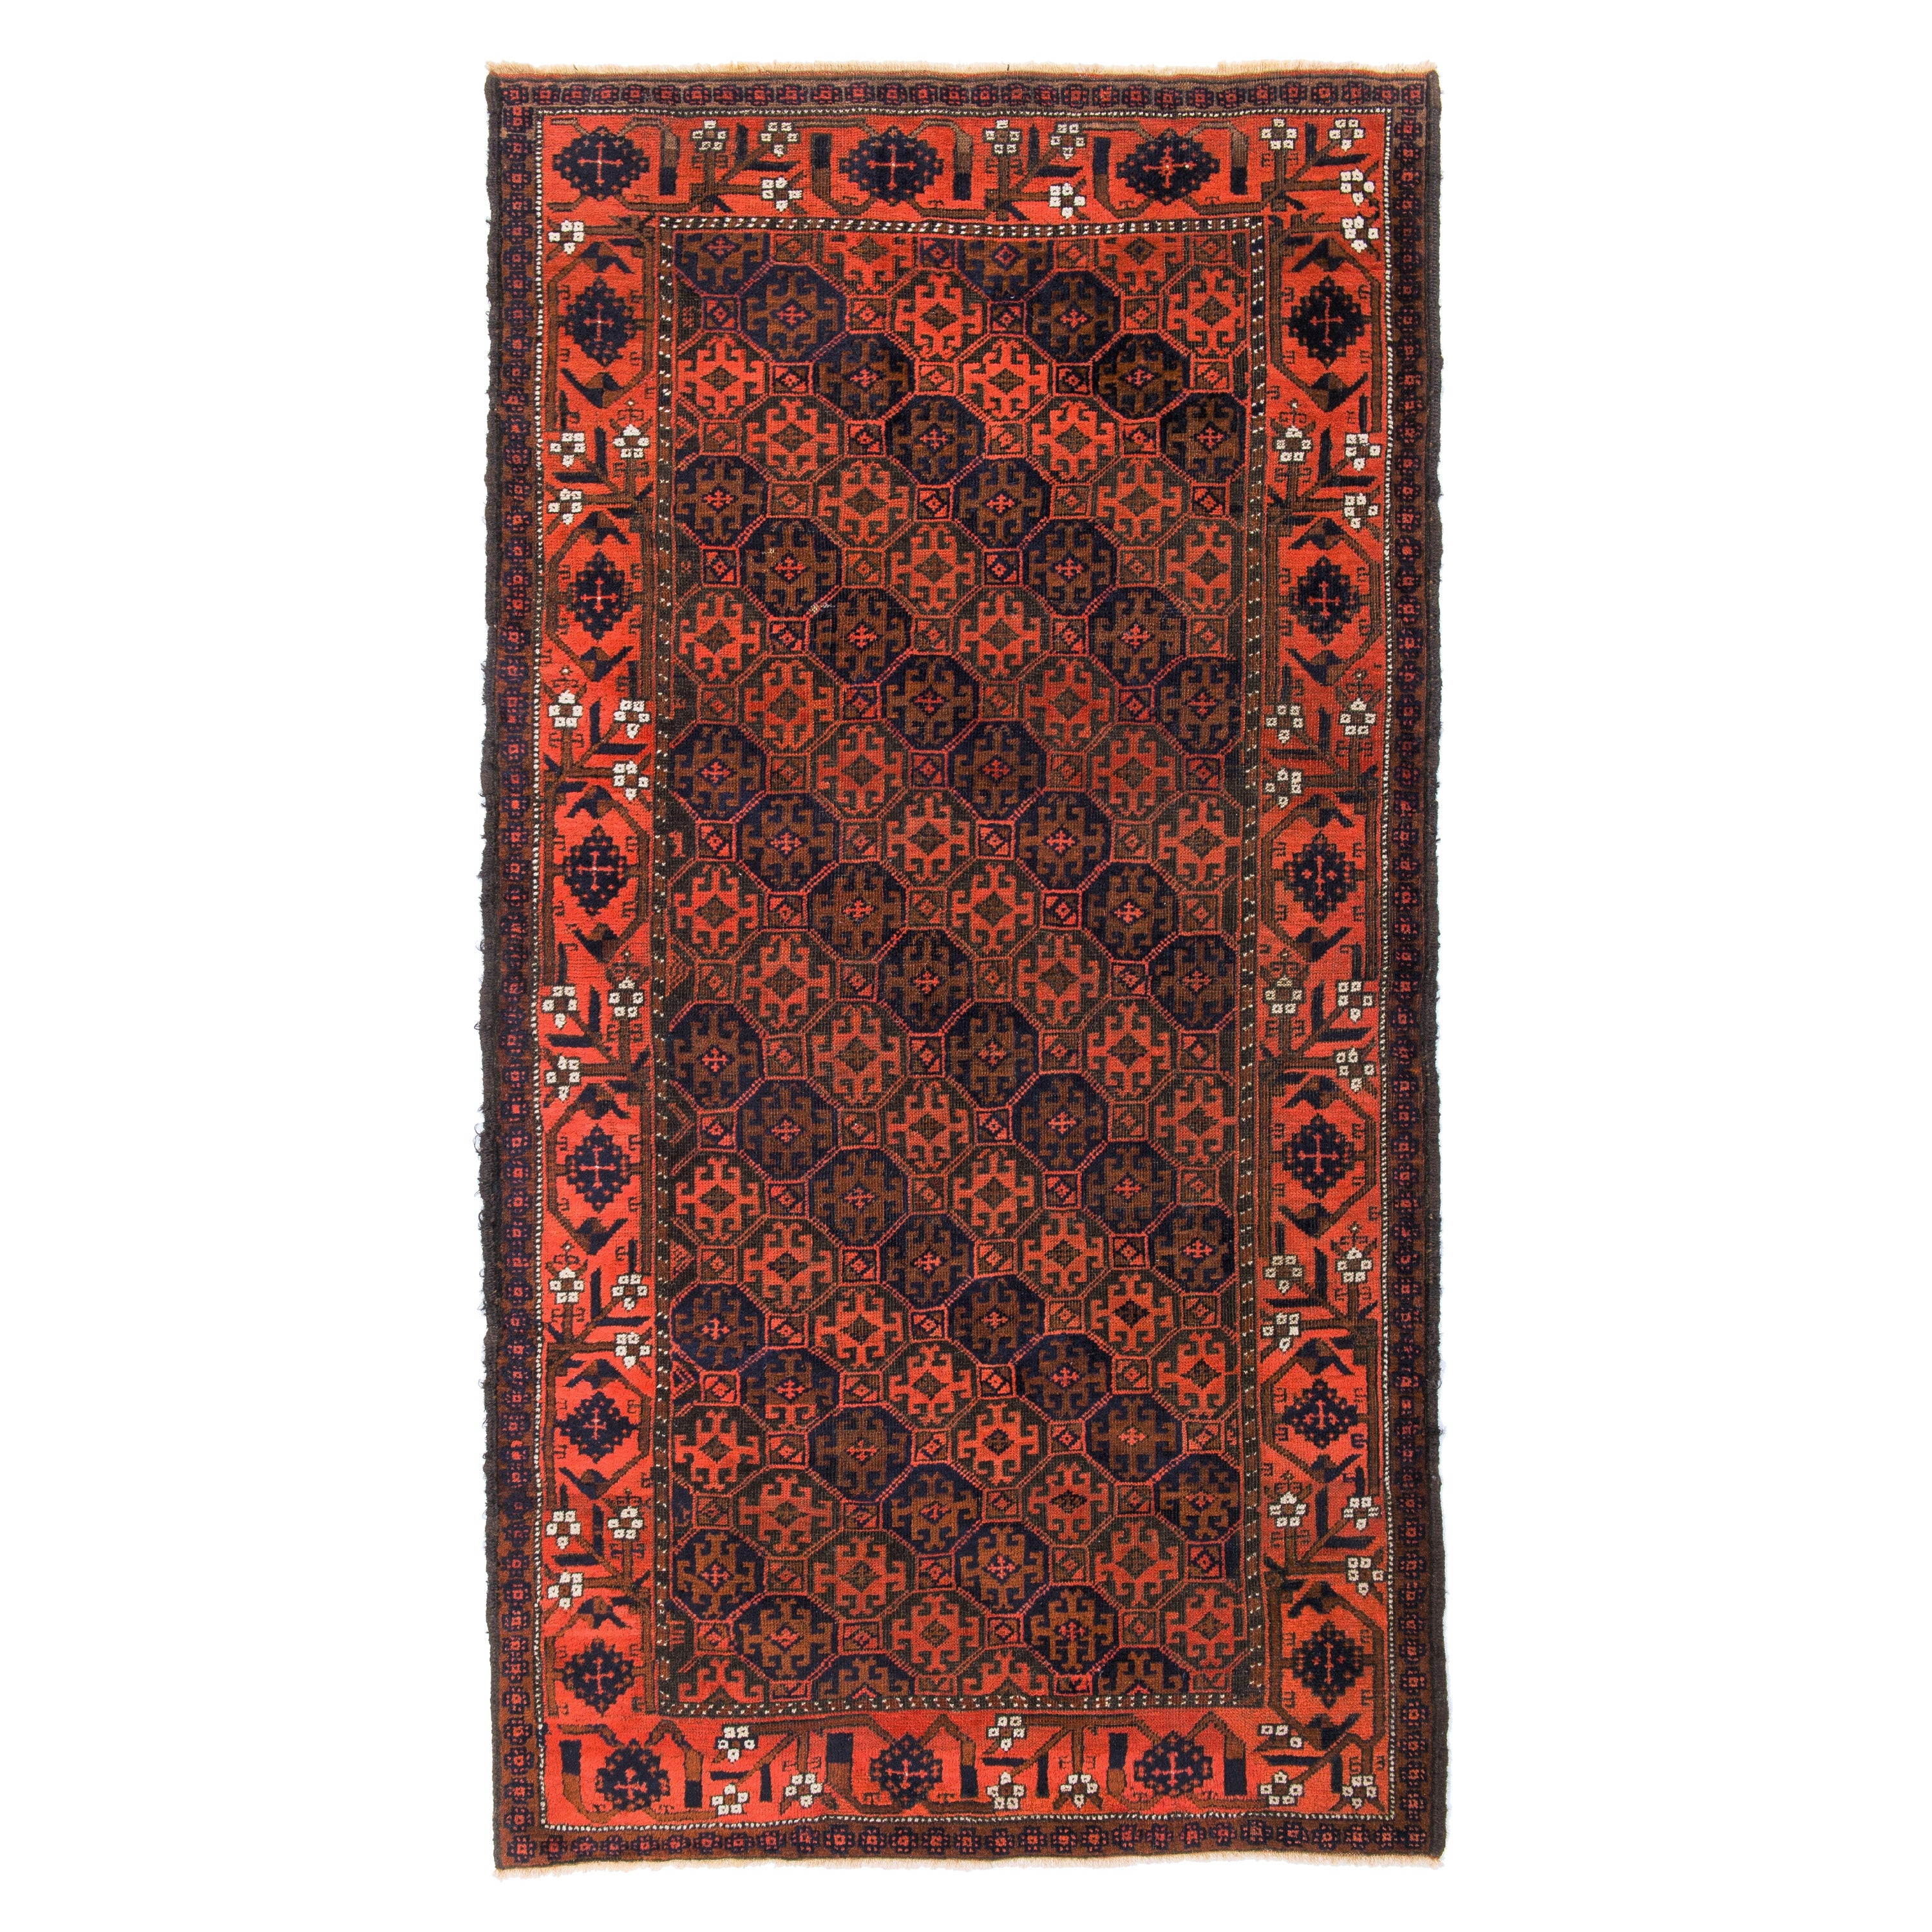 3.4x6.2 Ft Rare Antique Tribal Baluch Rug from Afghanistan, Ca 1880, All Wool